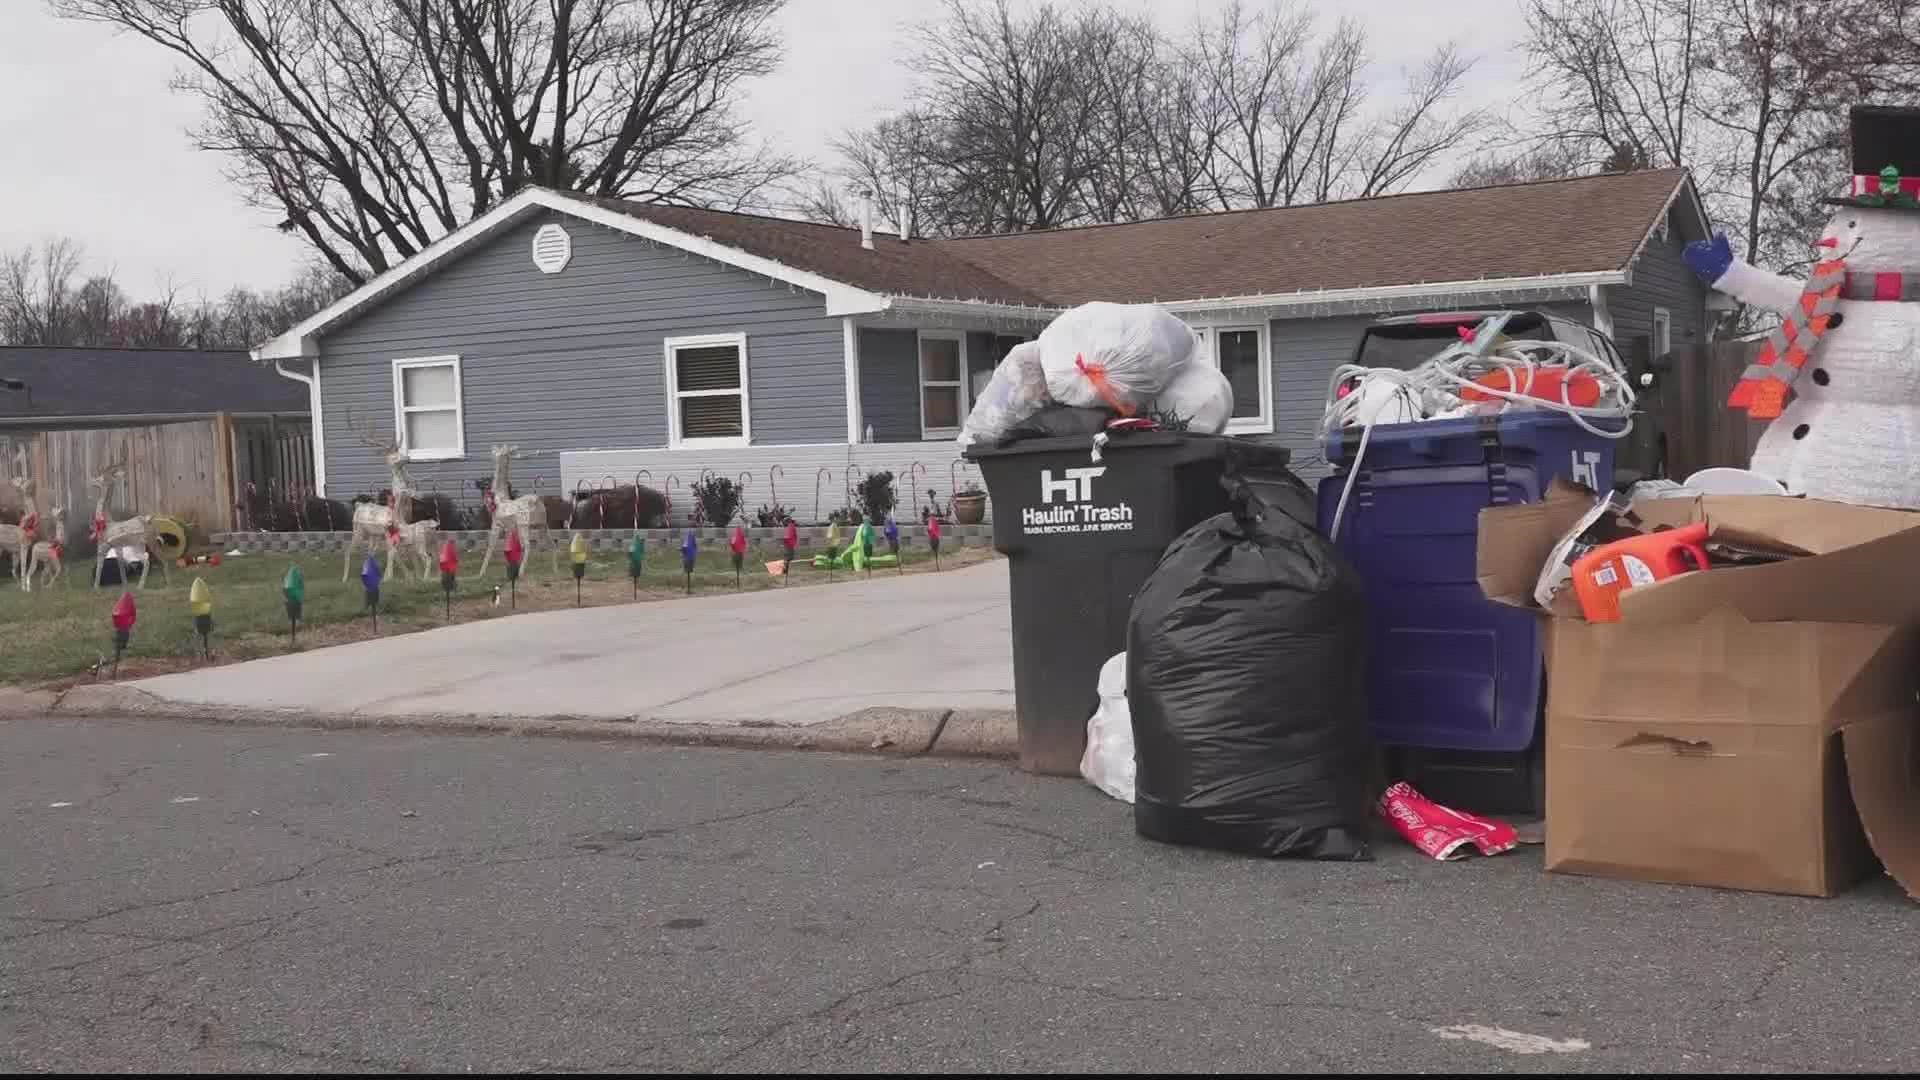 Trash just keeps piling up for thousands of people in Fairfax and Loudoun county after their garbage collection company went under